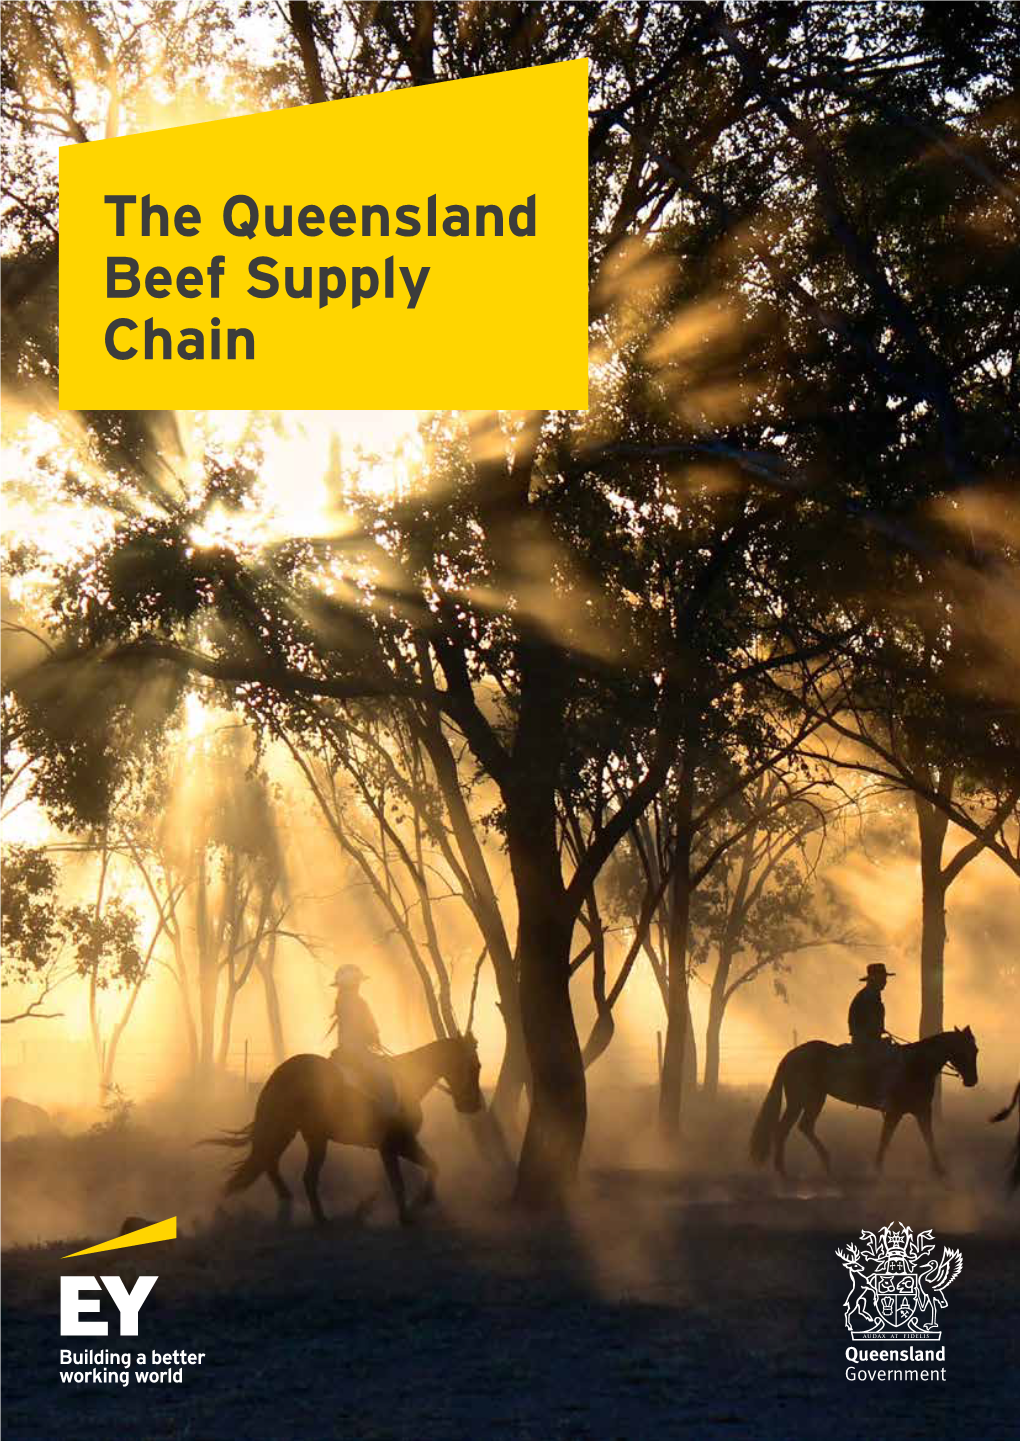 The Queensland Beef Supply Chain